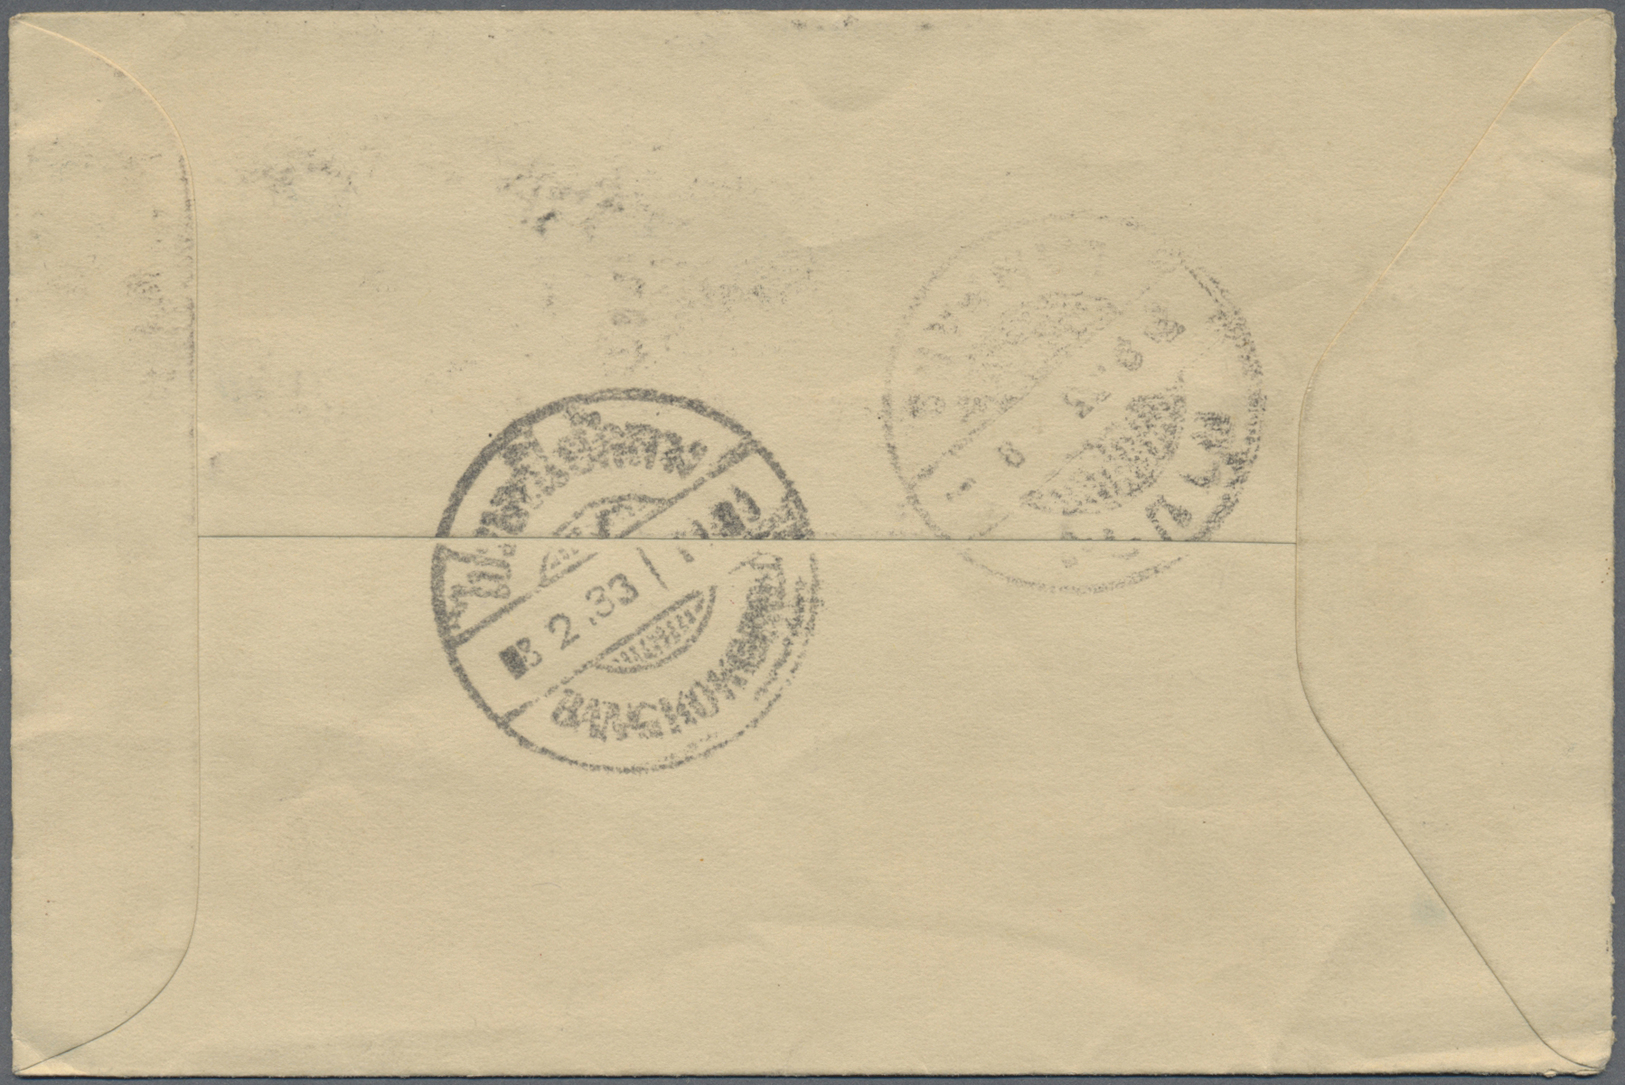 GA Thailand - Ganzsachen: 1941 Postal Stationery Envelope 10s. Red Used From Lampang To Bangkok, Cancelled By Wavy Lines - Thailand